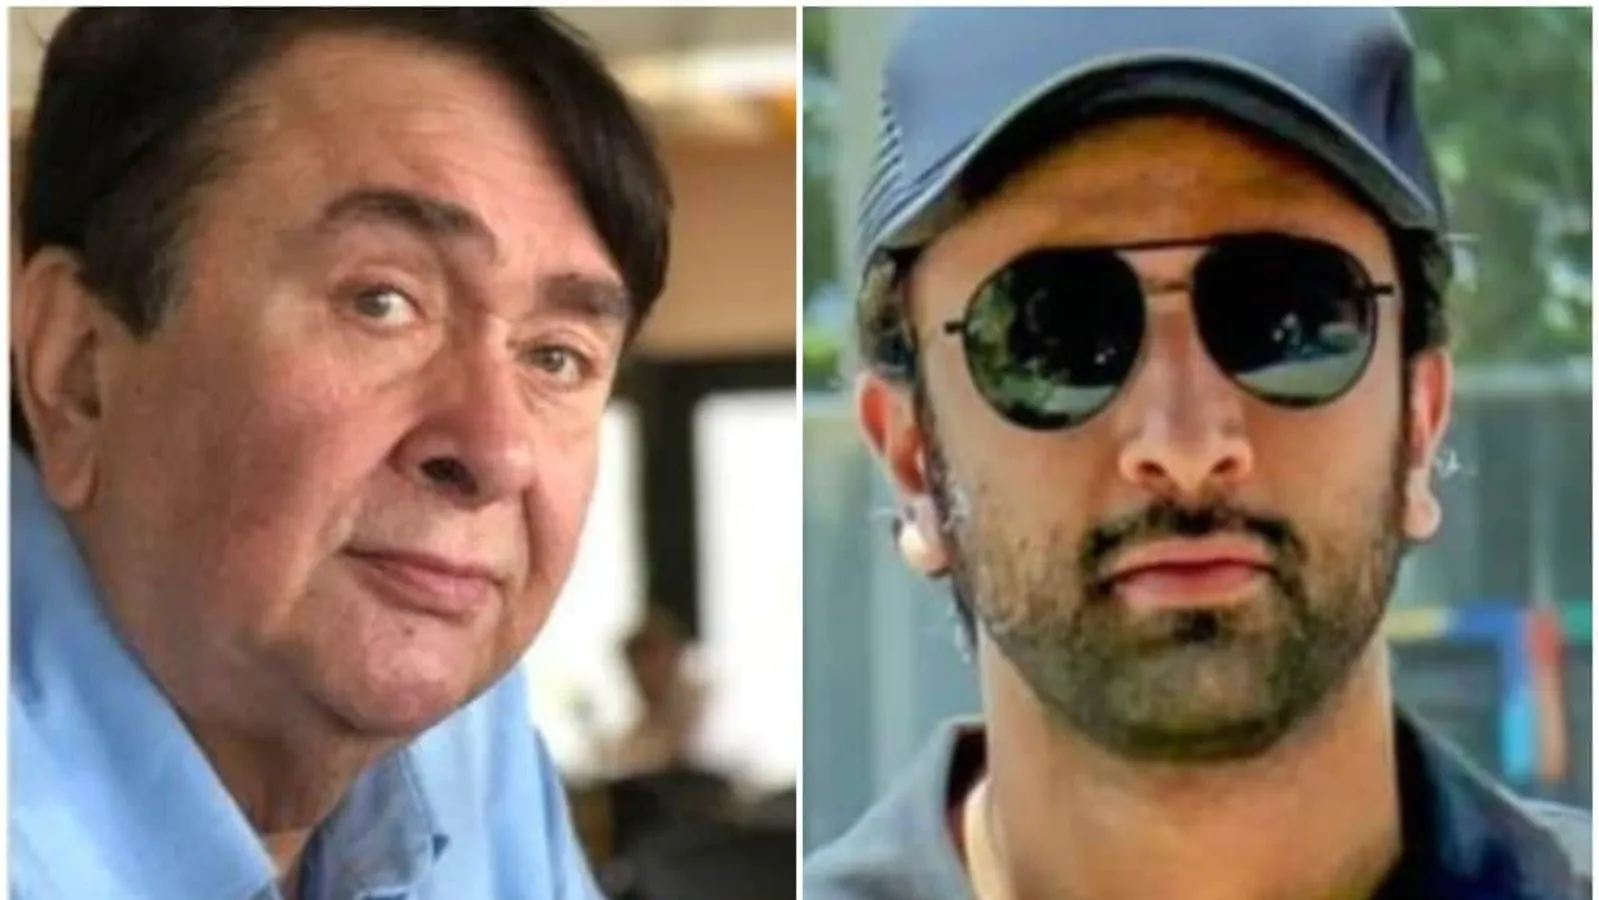 Randhir Kapoor says he’s doesn’t have dementia, reacts to Ranbir Kapoor’s remark: ‘He is entitled to say what he wants’